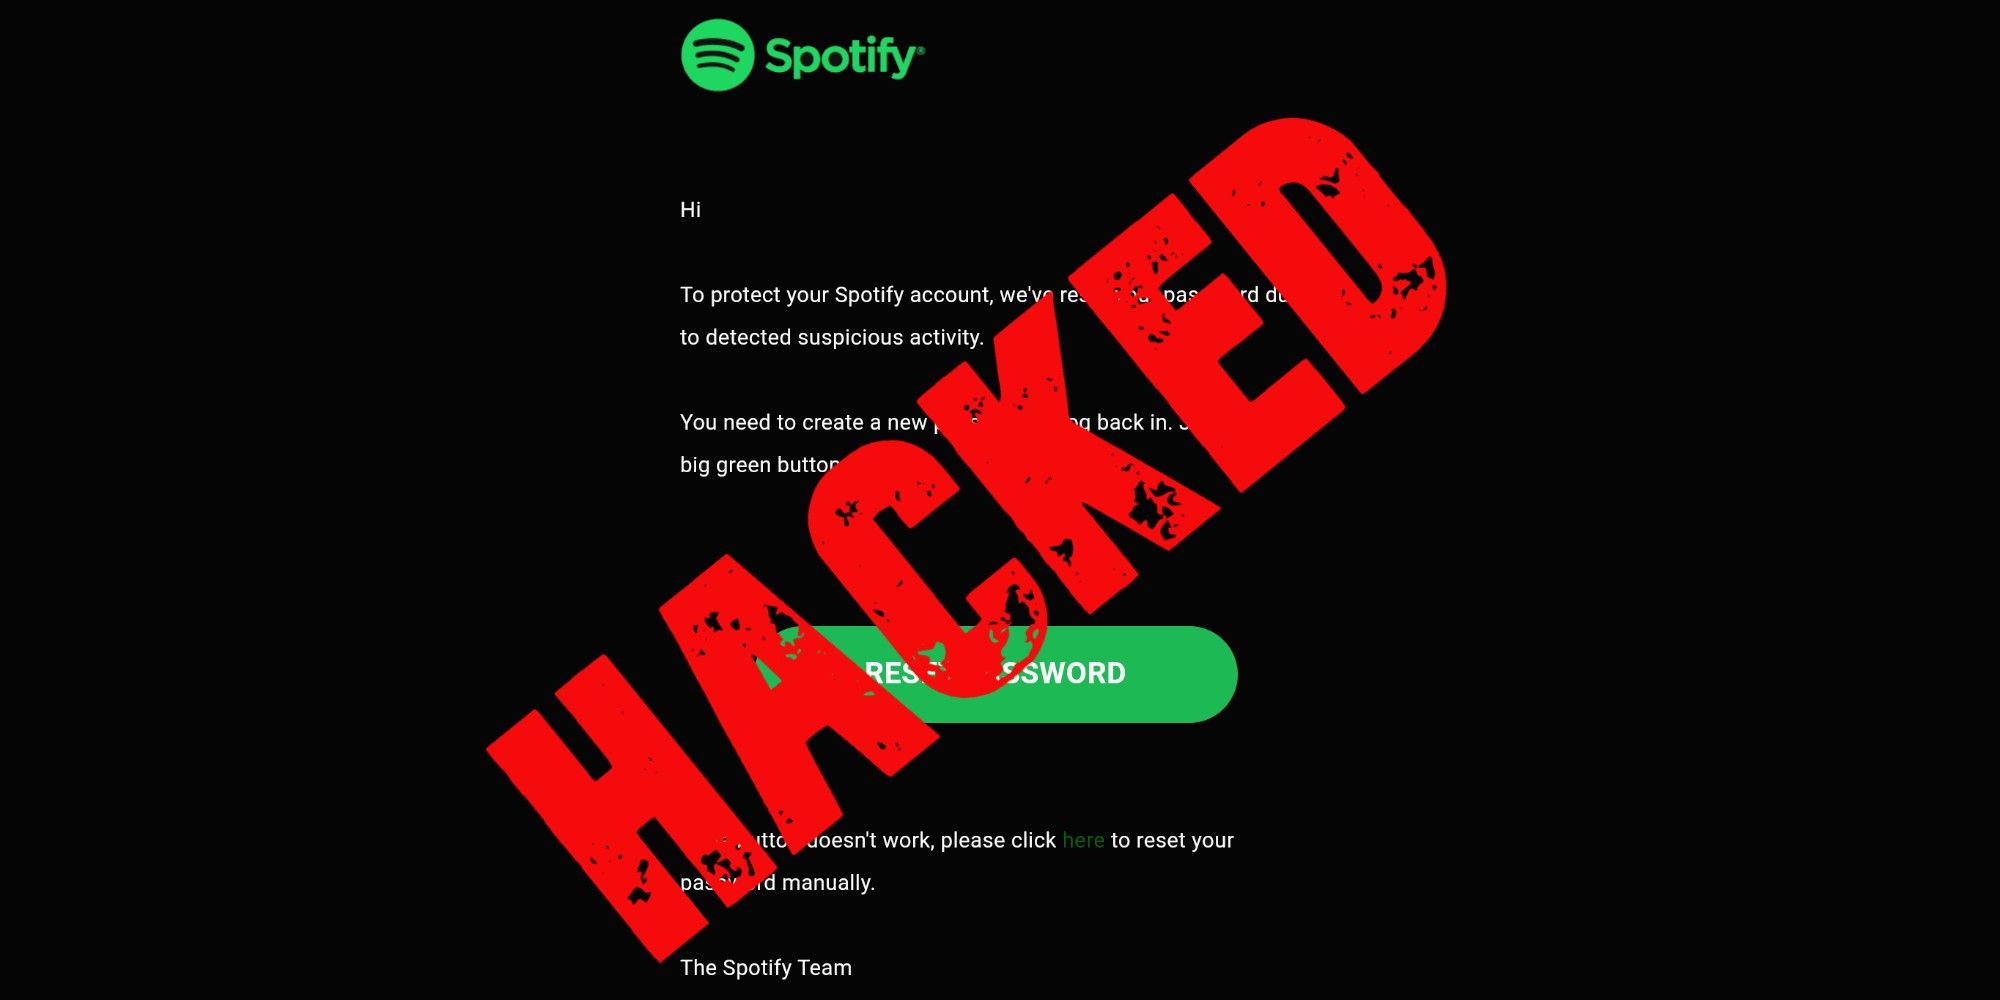 Spotify Gets Hacked